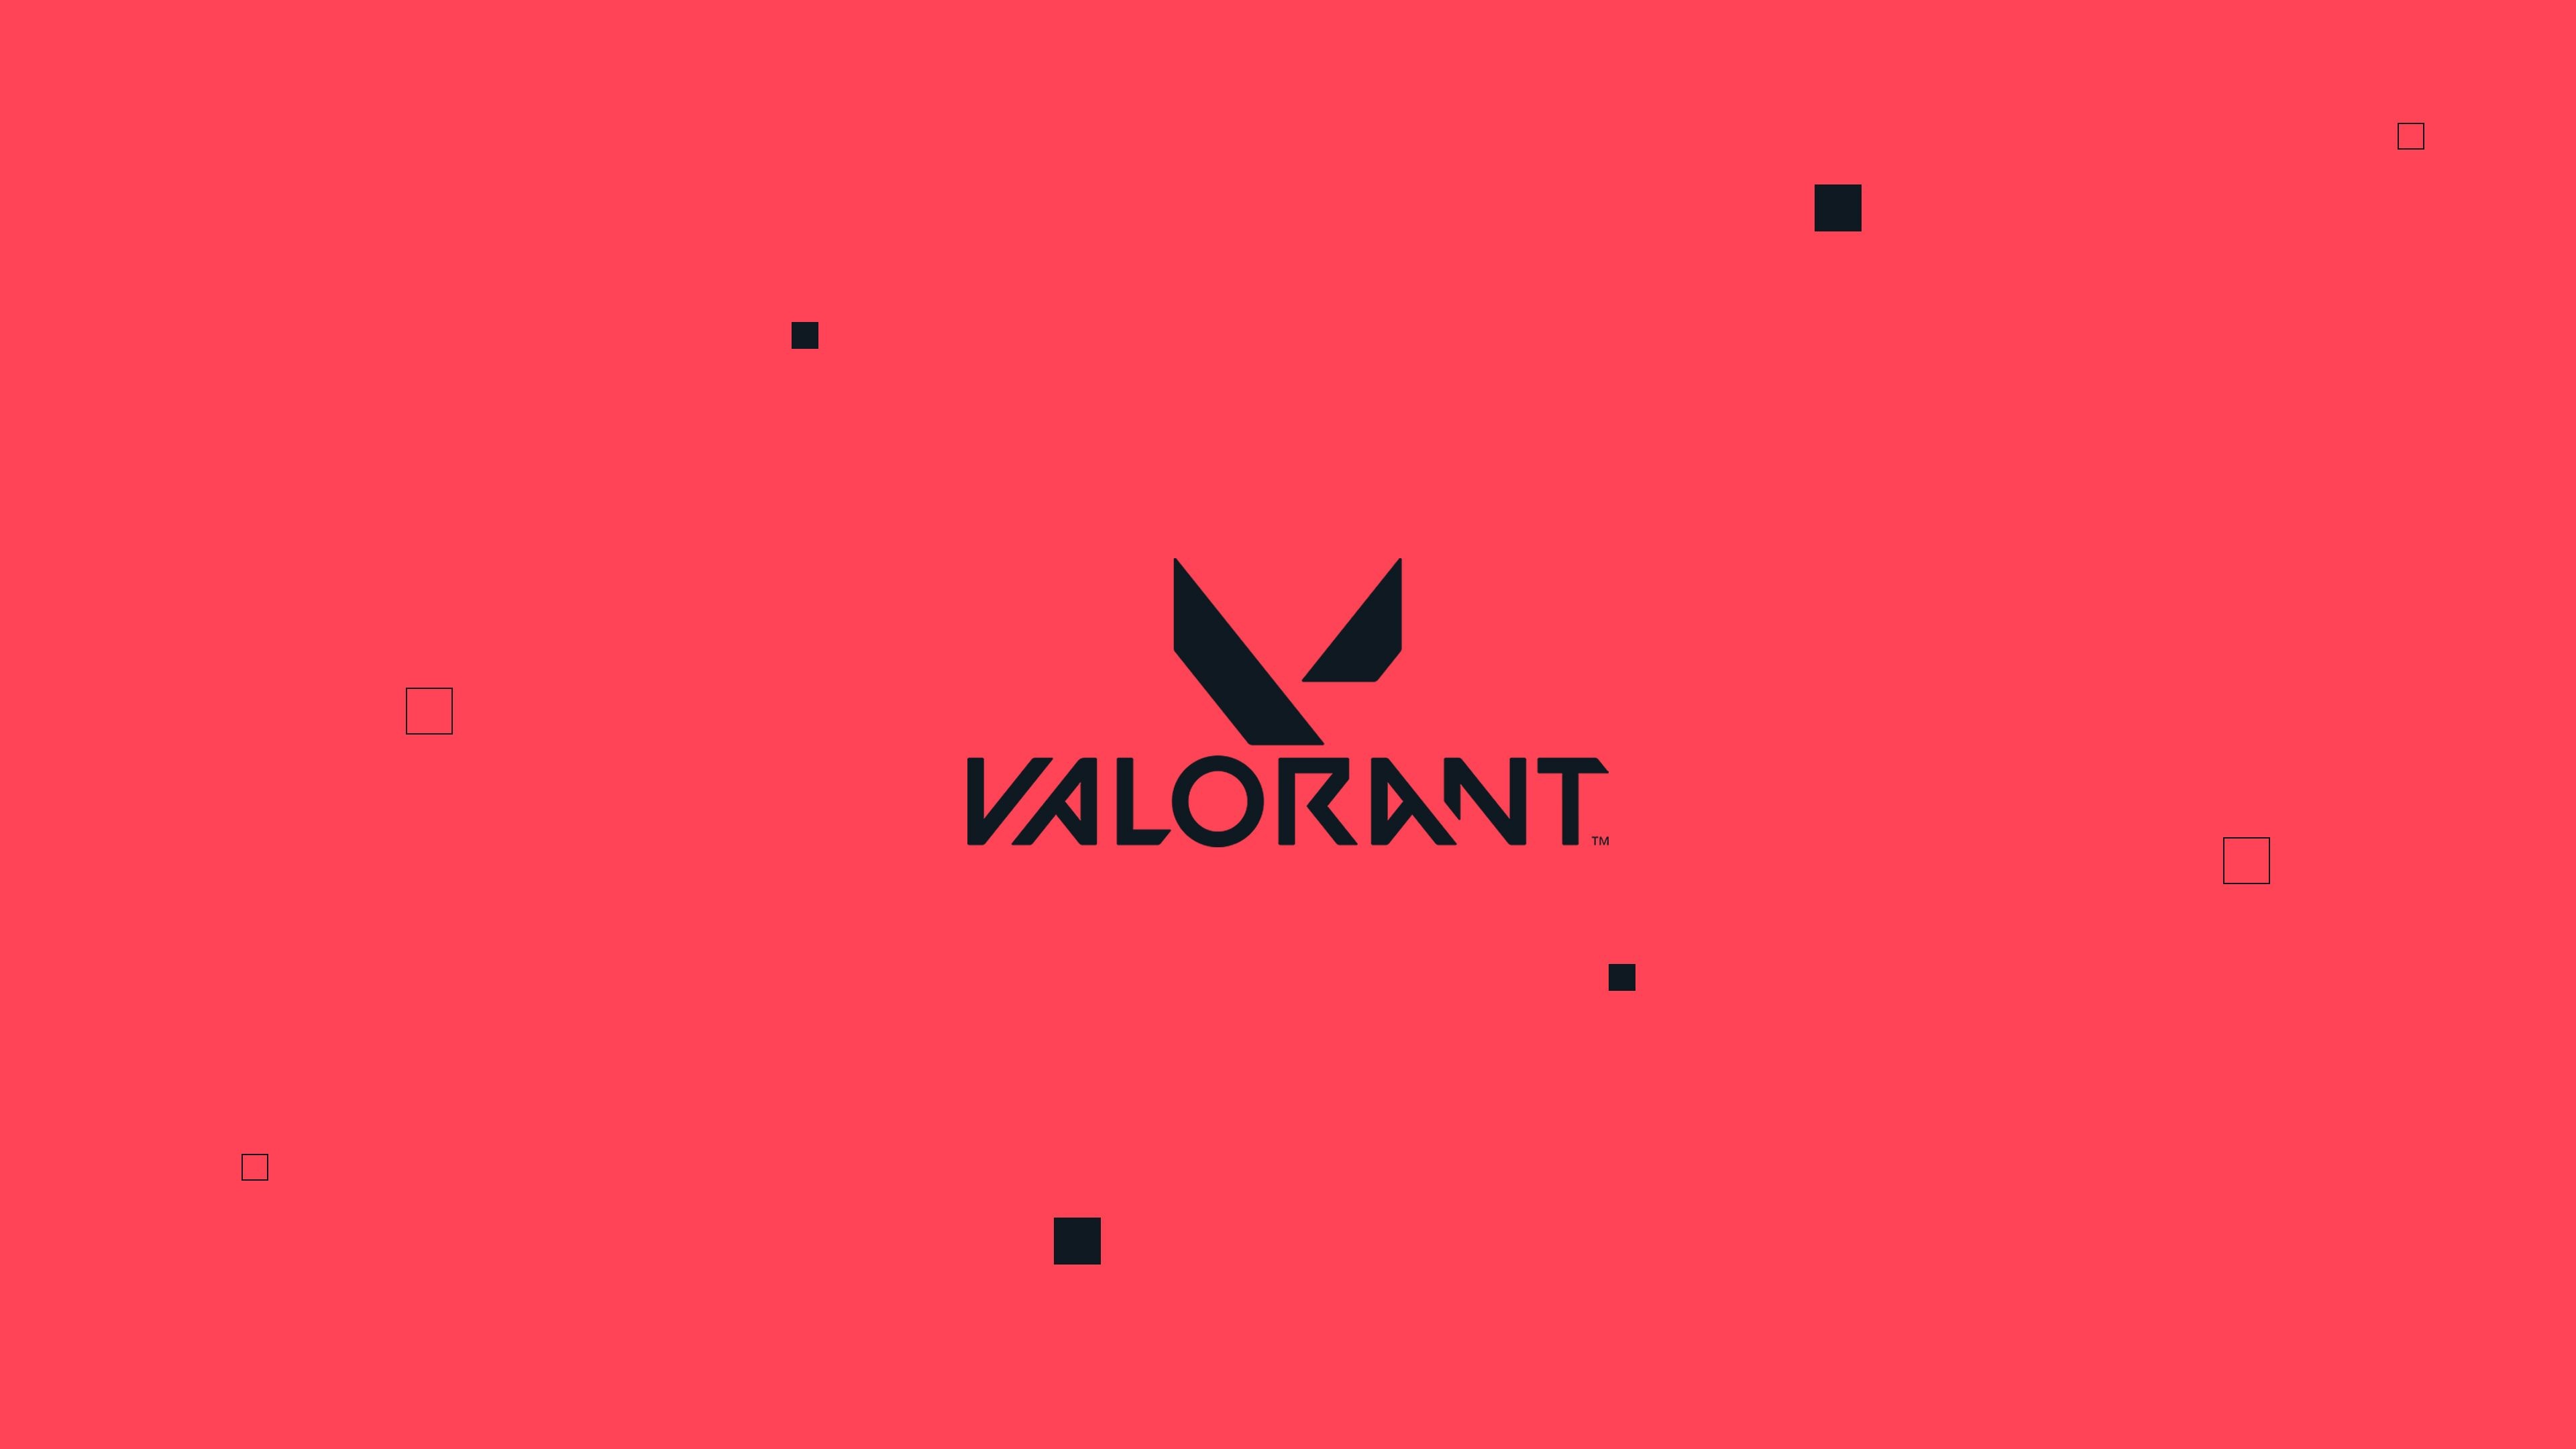 High definition Valorant wallpapers, Ultra HD gaming backgrounds, 4K gaming visuals, Game's graphic design, 3840x2160 4K Desktop